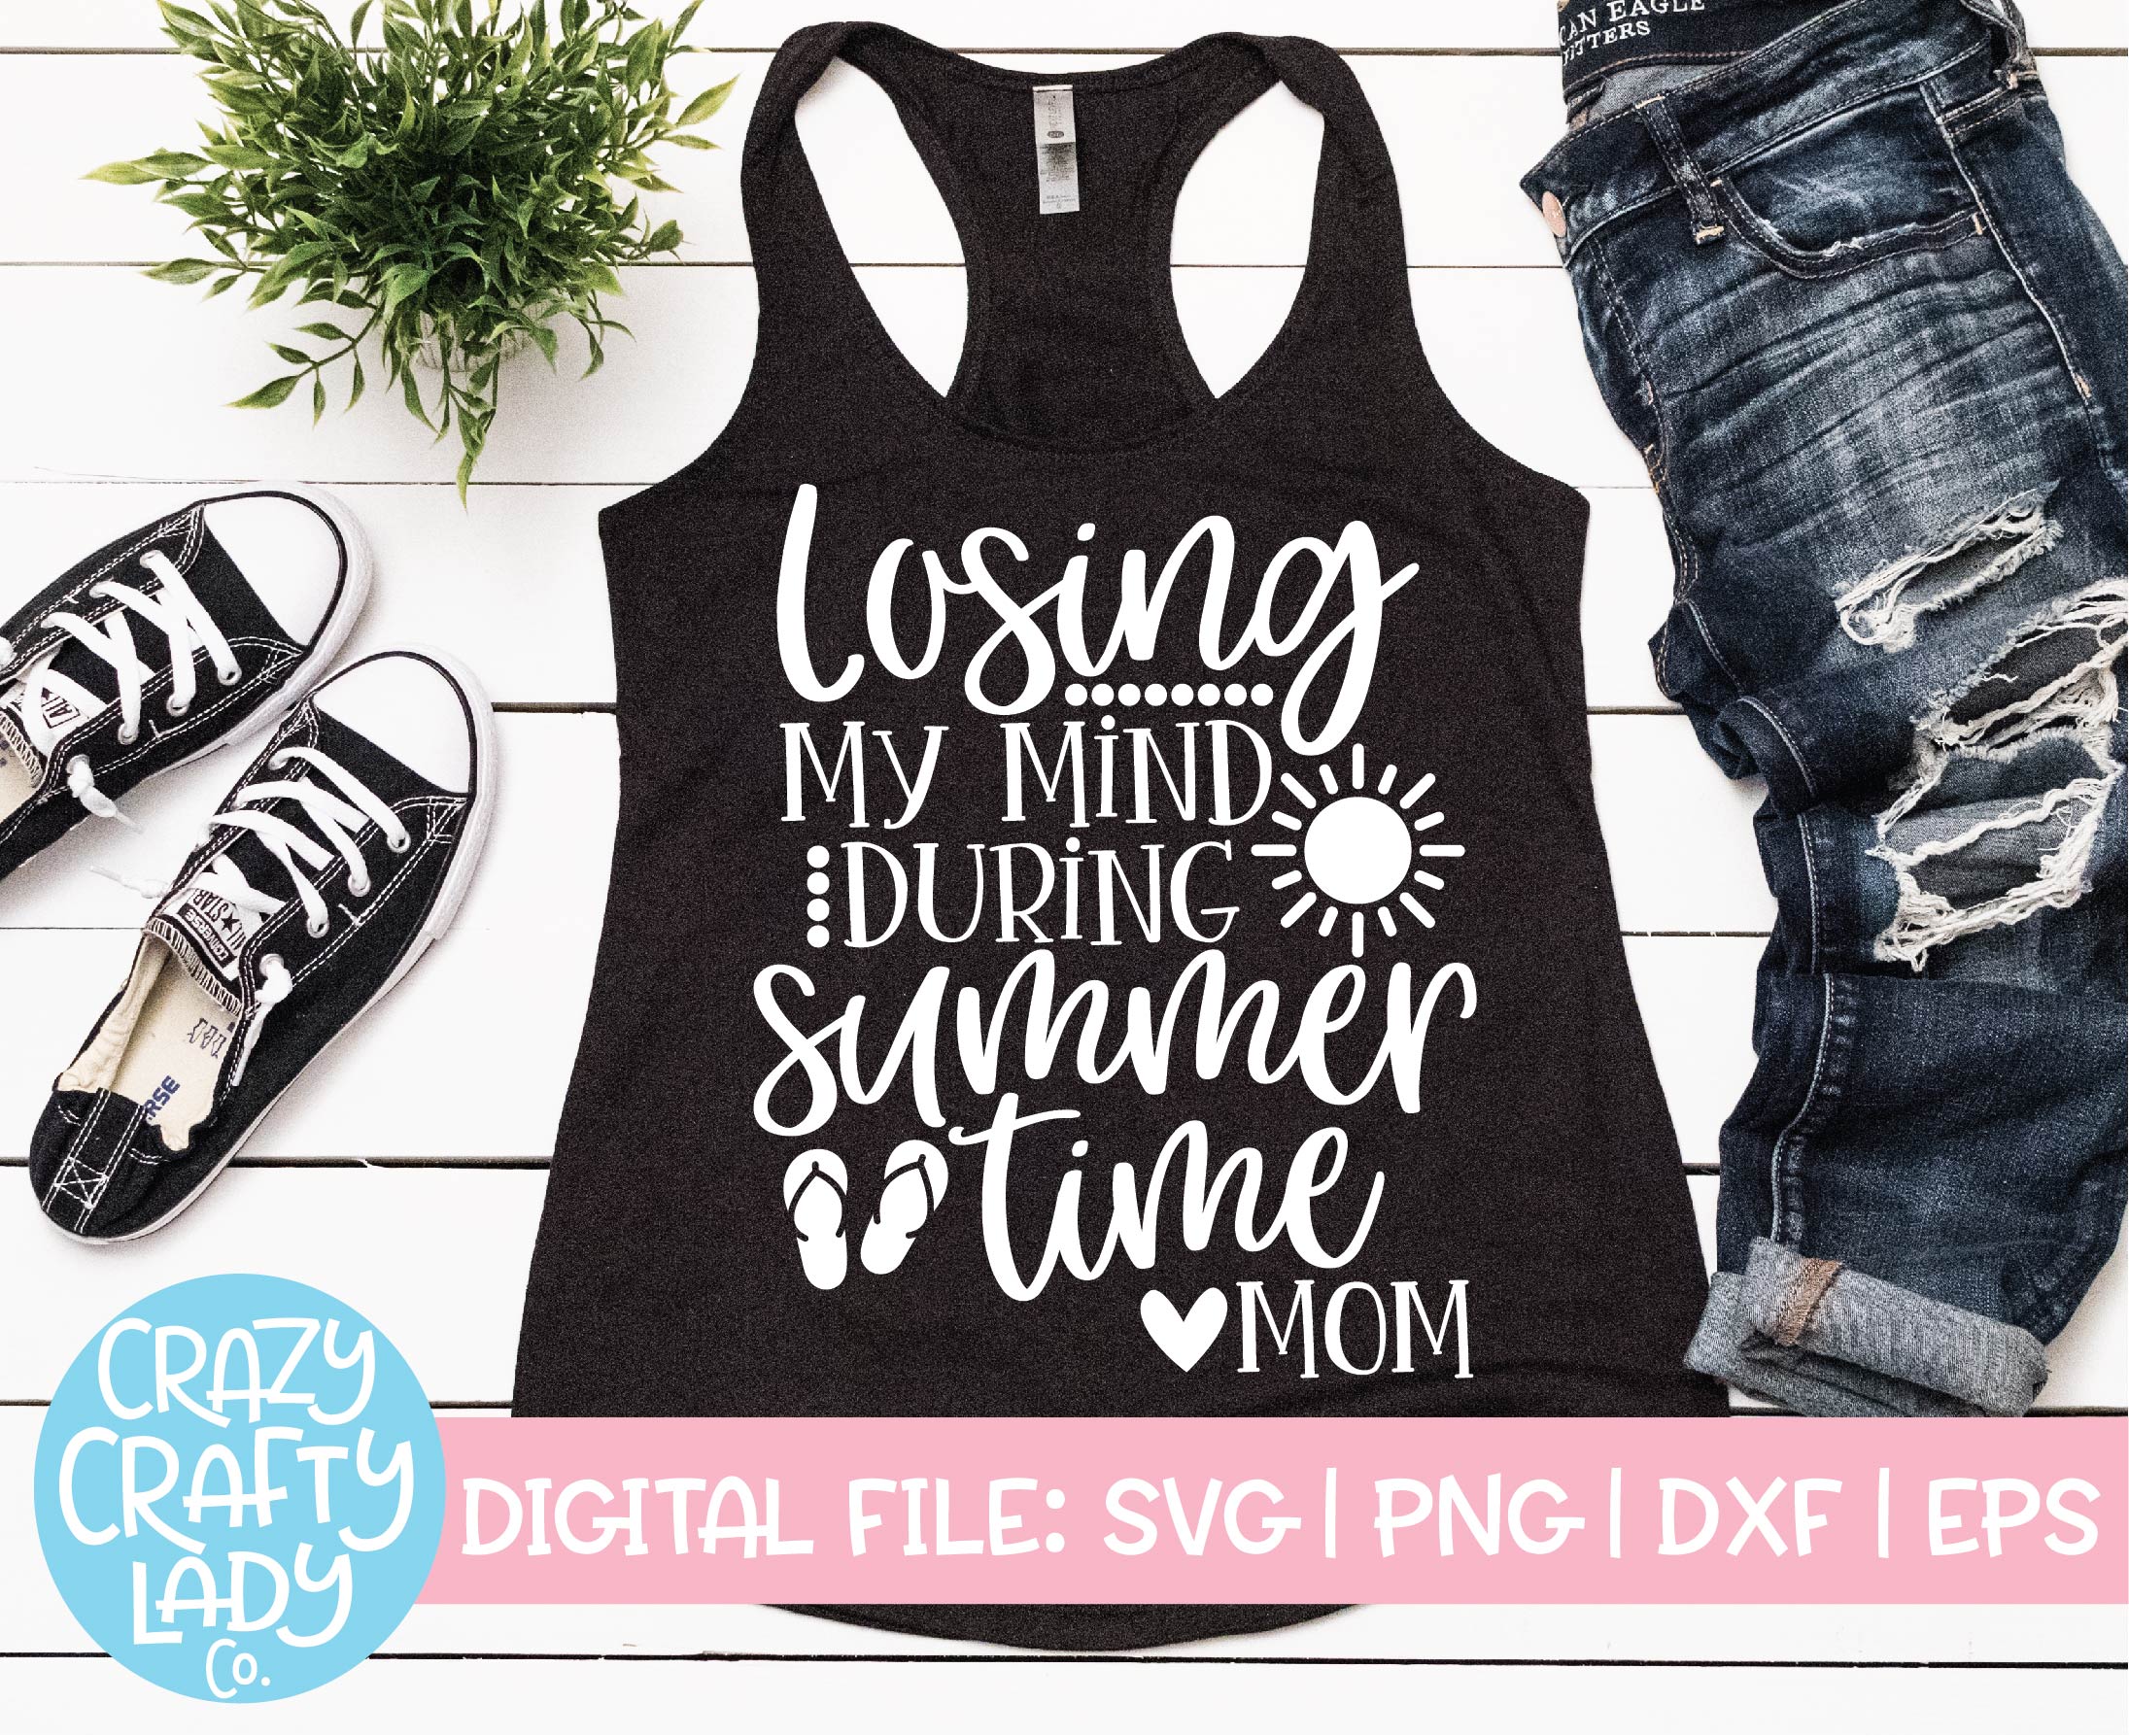 Download Losing My Mind During Summertime Svg Cut File Crazy Crafty Lady Co